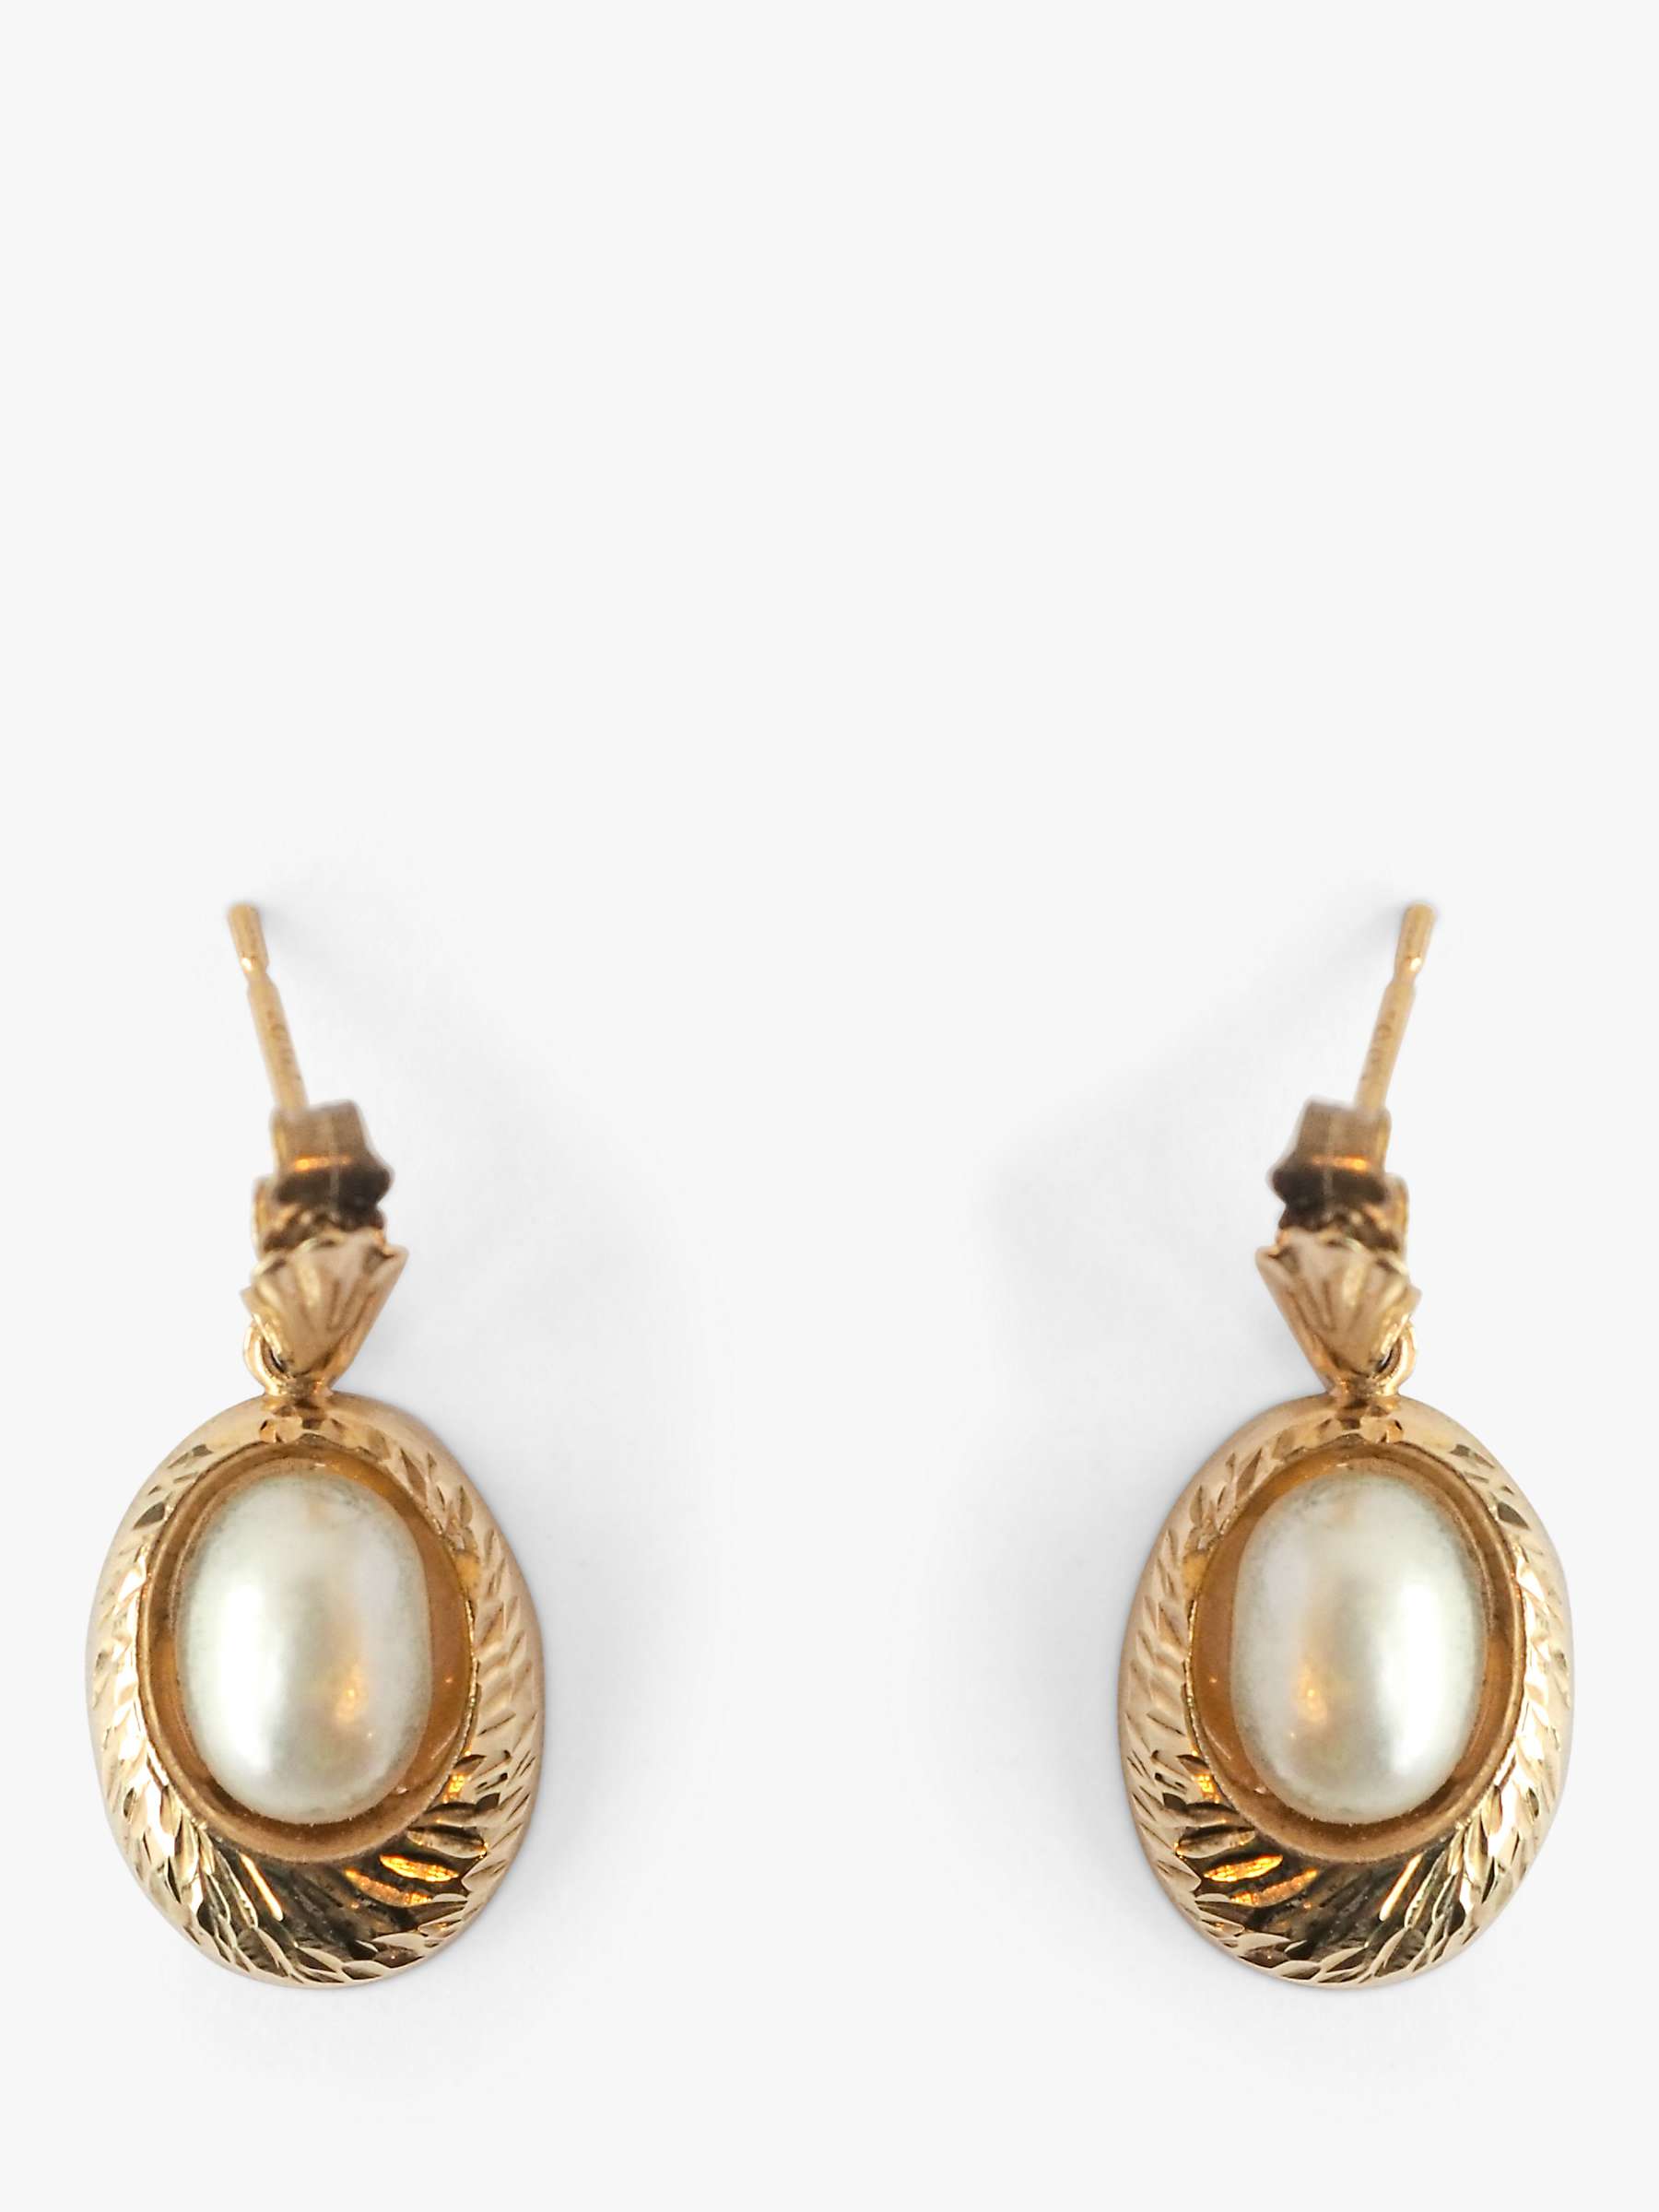 Buy L & T Heirlooms Second Hand 9ct Yellow Gold Oval Pearl Drop Earrings, Gold Online at johnlewis.com